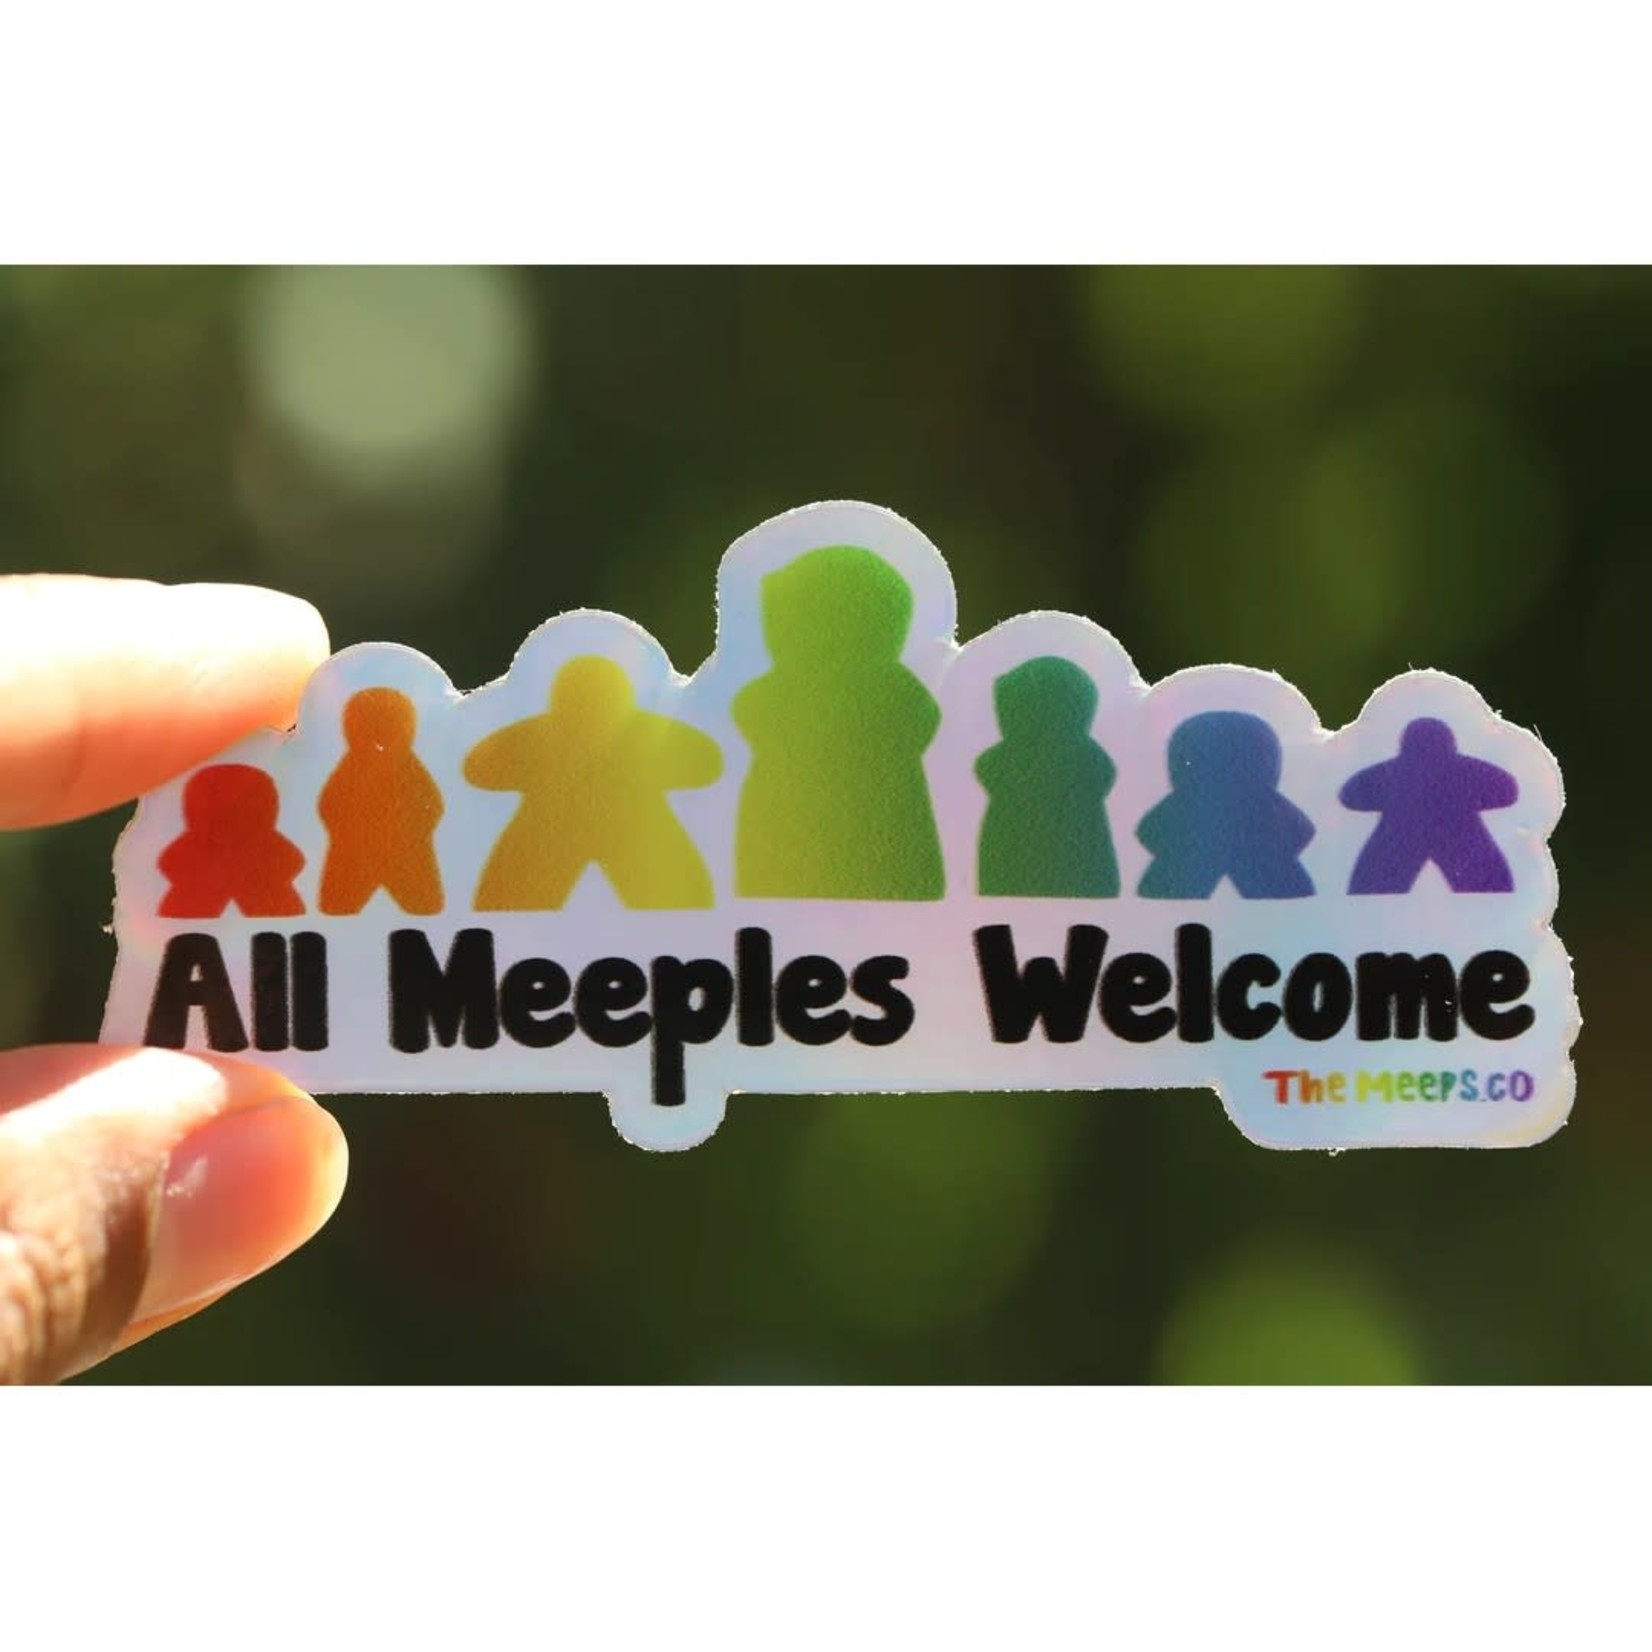 The Meeps All Meeples Welcome Holographic Sticker 3 in